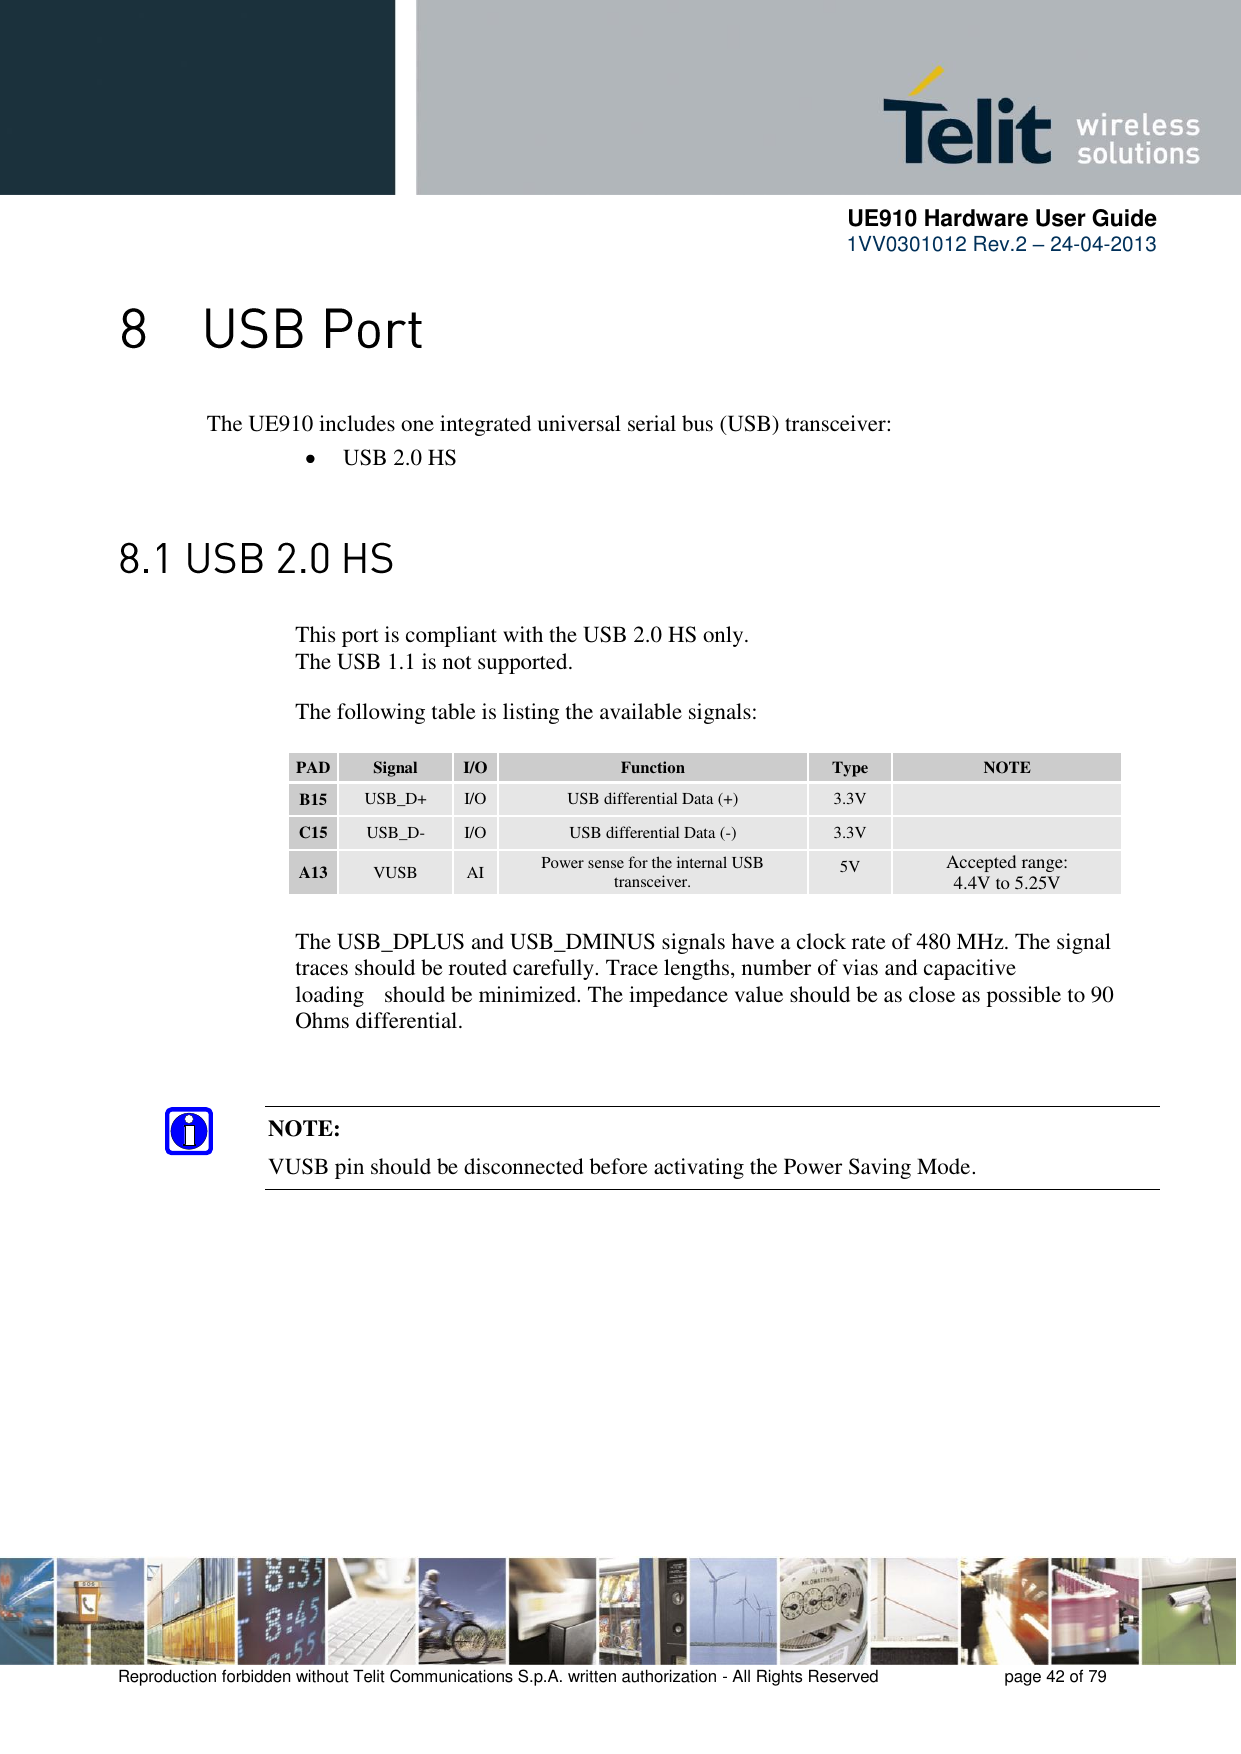      UE910 Hardware User Guide  1VV0301012 Rev.2 – 24-04-2013    Reproduction forbidden without Telit Communications S.p.A. written authorization - All Rights Reserved    page 42 of 79   The UE910 includes one integrated universal serial bus (USB) transceiver:  USB 2.0 HS   This port is compliant with the USB 2.0 HS only.     The USB 1.1 is not supported.          The following table is listing the available signals:  PAD Signal I/O Function Type NOTE B15 USB_D+ I/O USB differential Data (+) 3.3V  C15 USB_D- I/O USB differential Data (-) 3.3V  A13 VUSB AI Power sense for the internal USB transceiver. 5V Accepted range:  4.4V to 5.25V      The USB_DPLUS and USB_DMINUS signals have a clock rate of 480 MHz. The signal     traces should be routed carefully. Trace lengths, number of vias and capacitive      loading   should be minimized. The impedance value should be as close as possible to 90     Ohms differential.   NOTE: VUSB pin should be disconnected before activating the Power Saving Mode.    